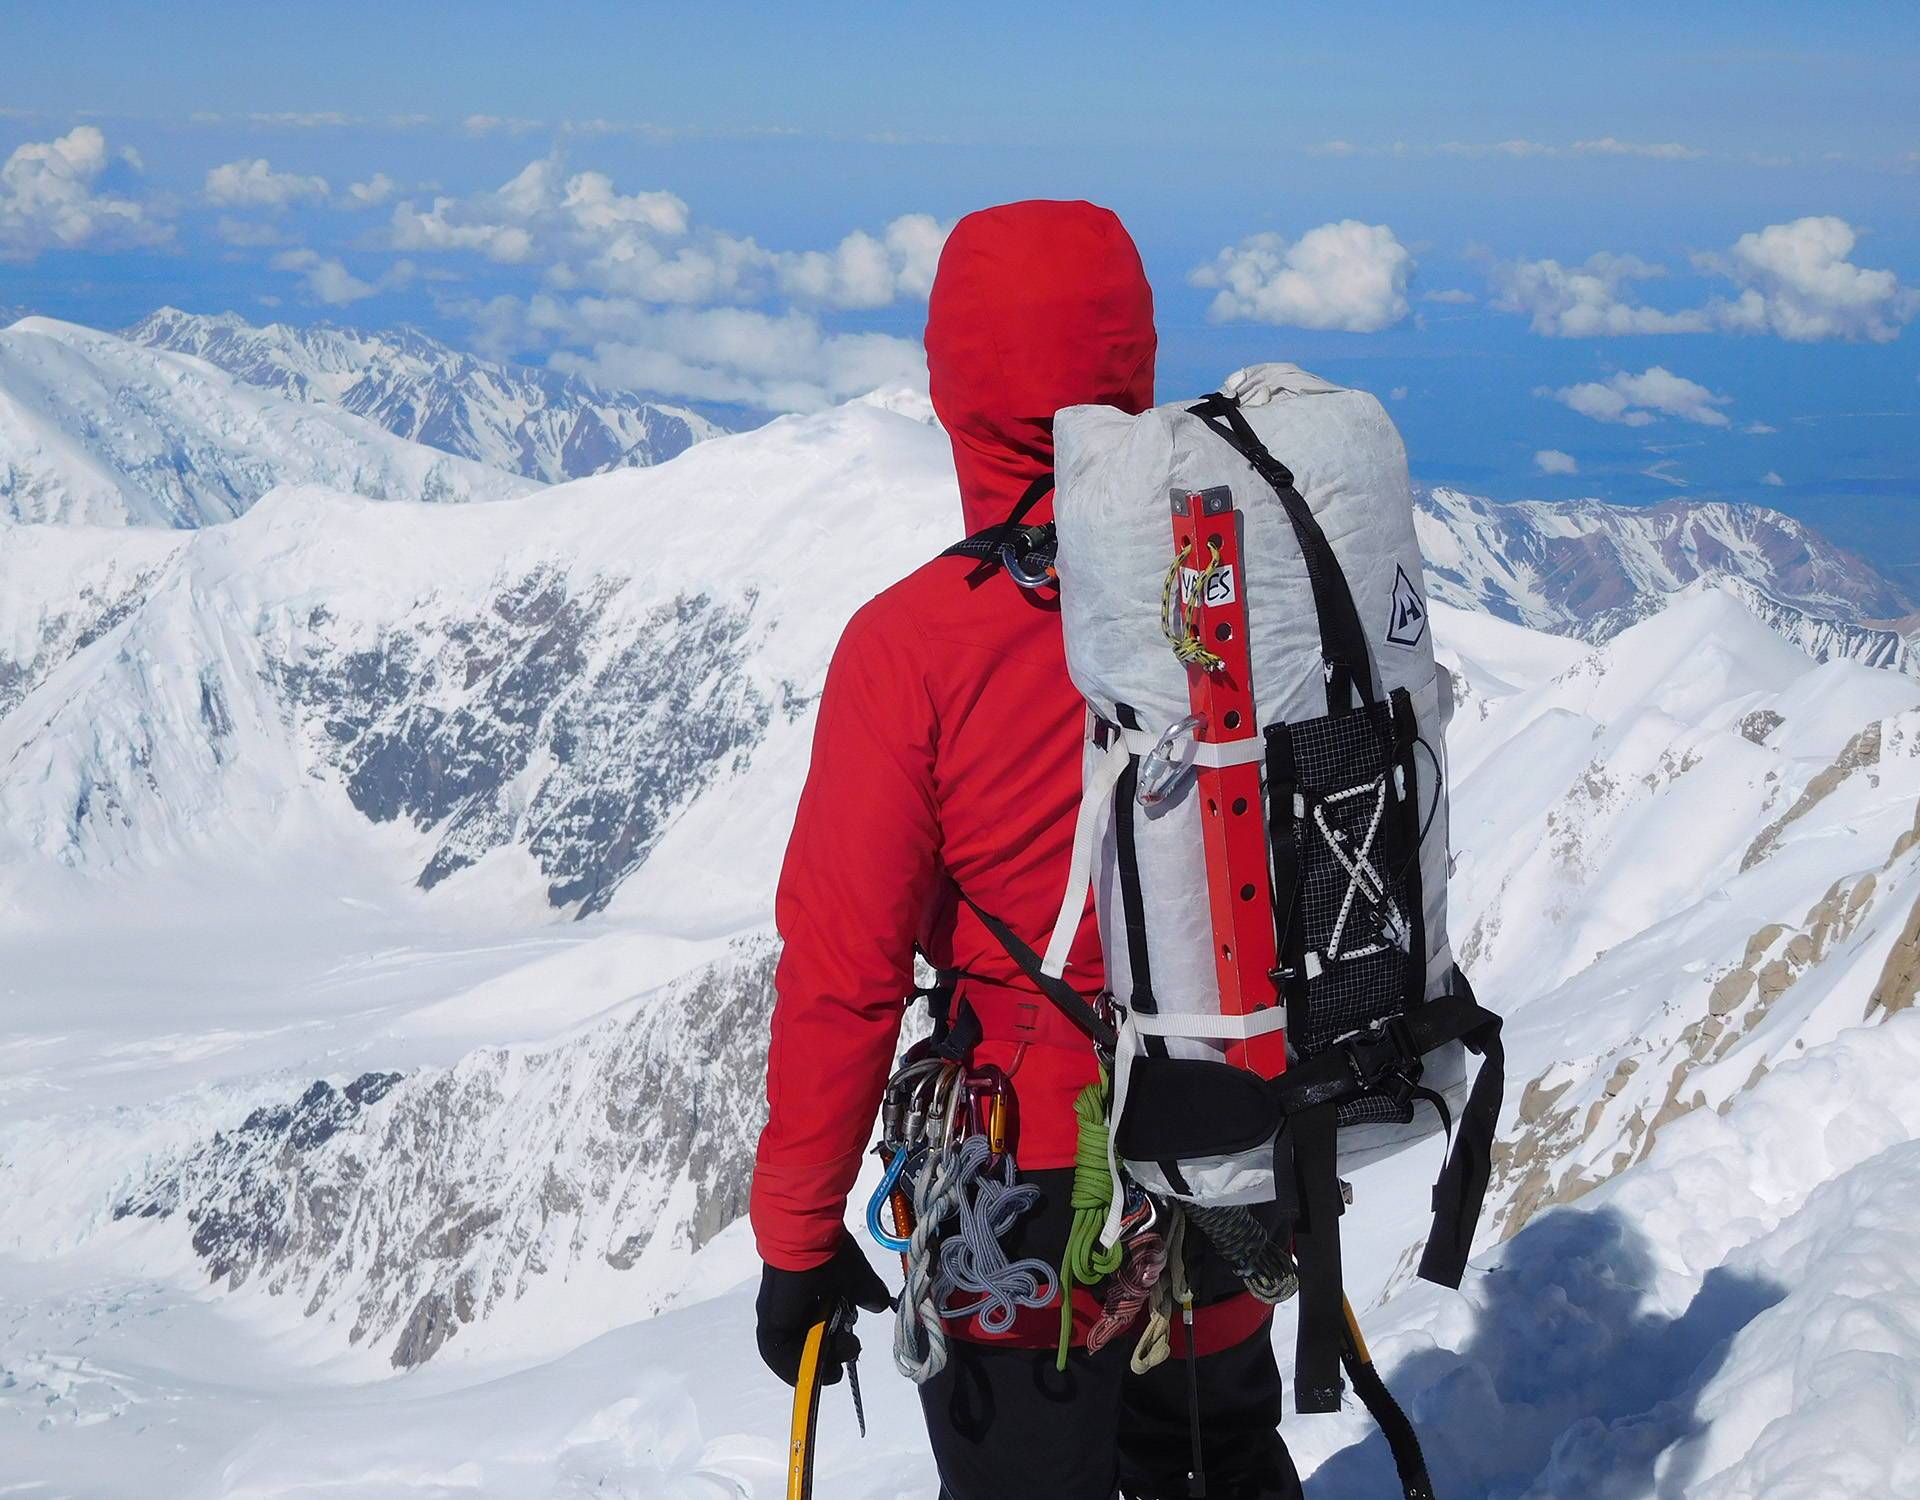 A man with a backpack standing on top of a snowy mountain.